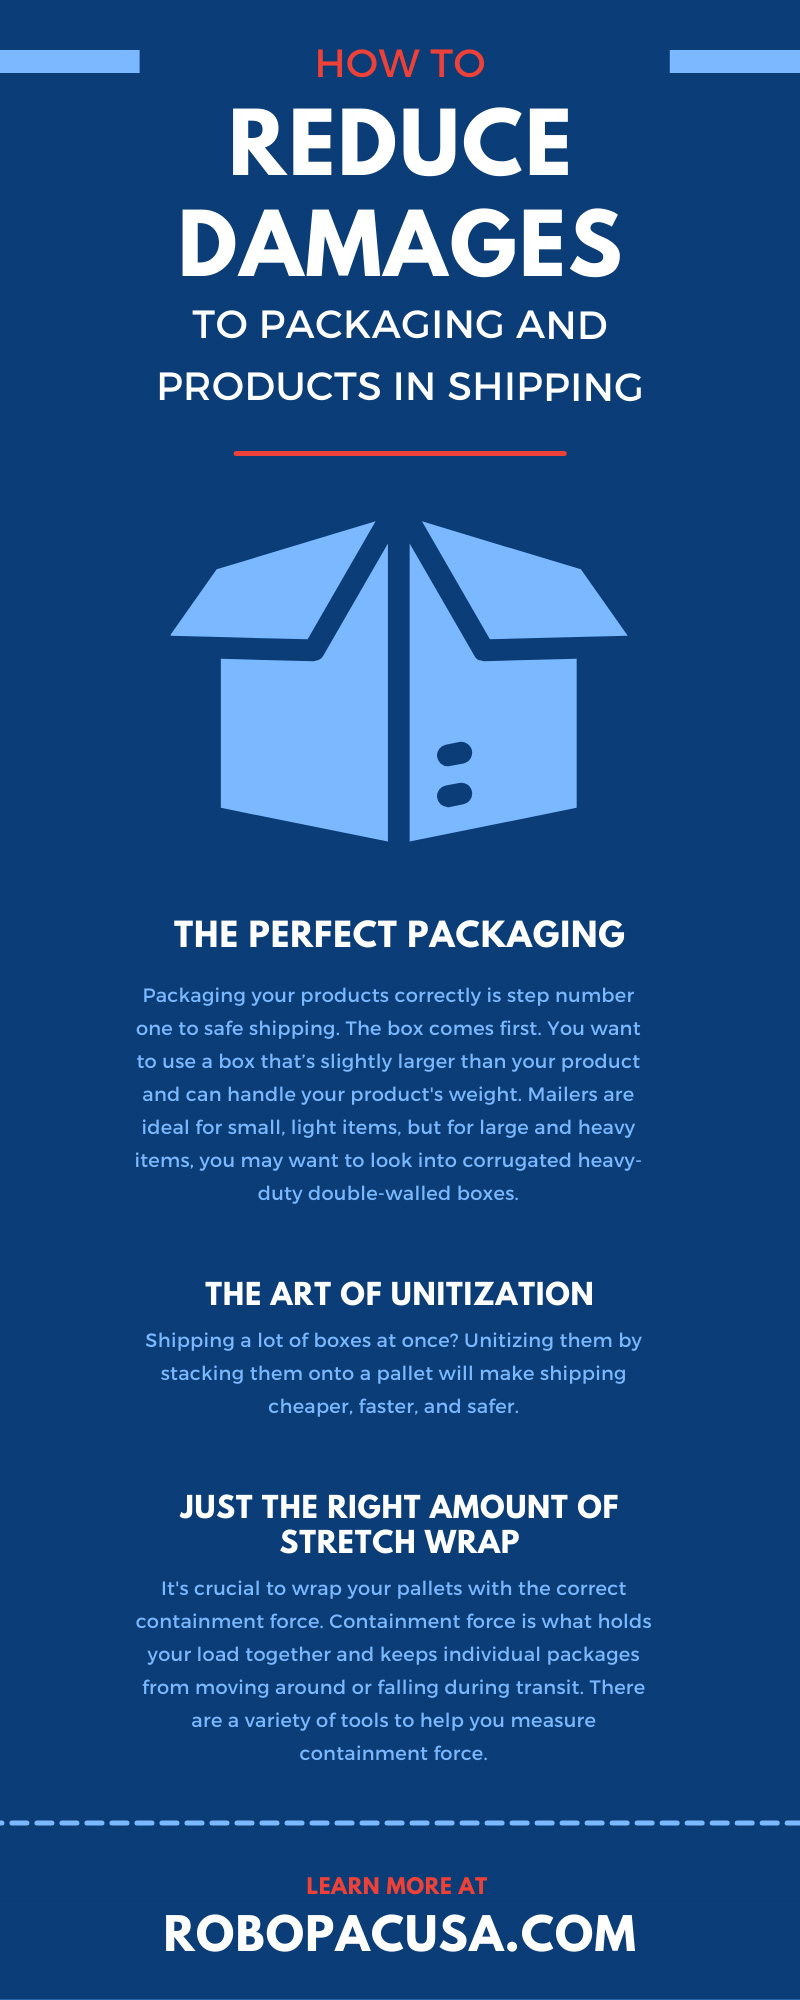 How To Reduce Damages To Packaging and Products in Shipping